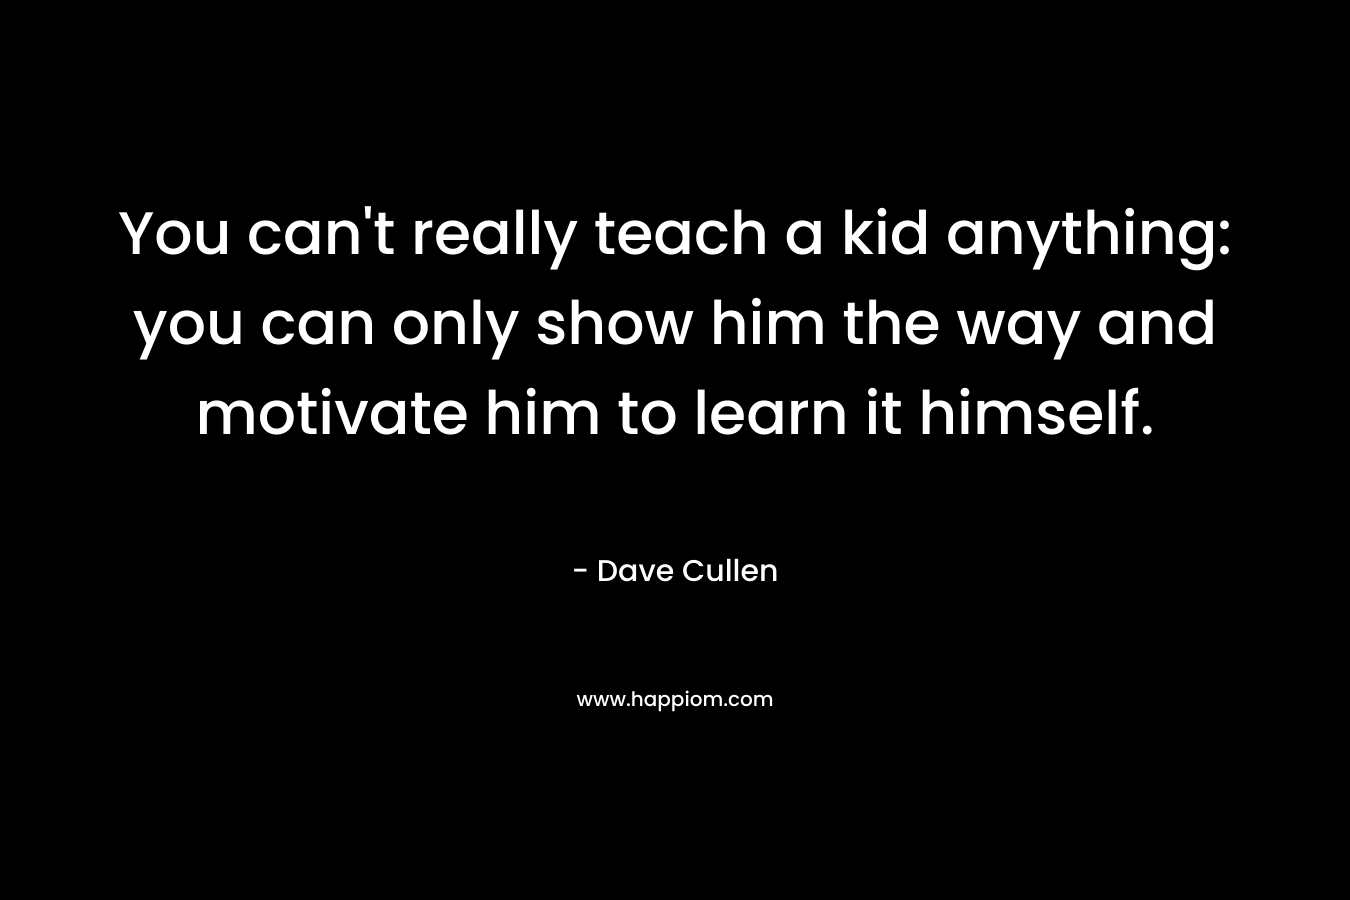 You can't really teach a kid anything: you can only show him the way and motivate him to learn it himself.